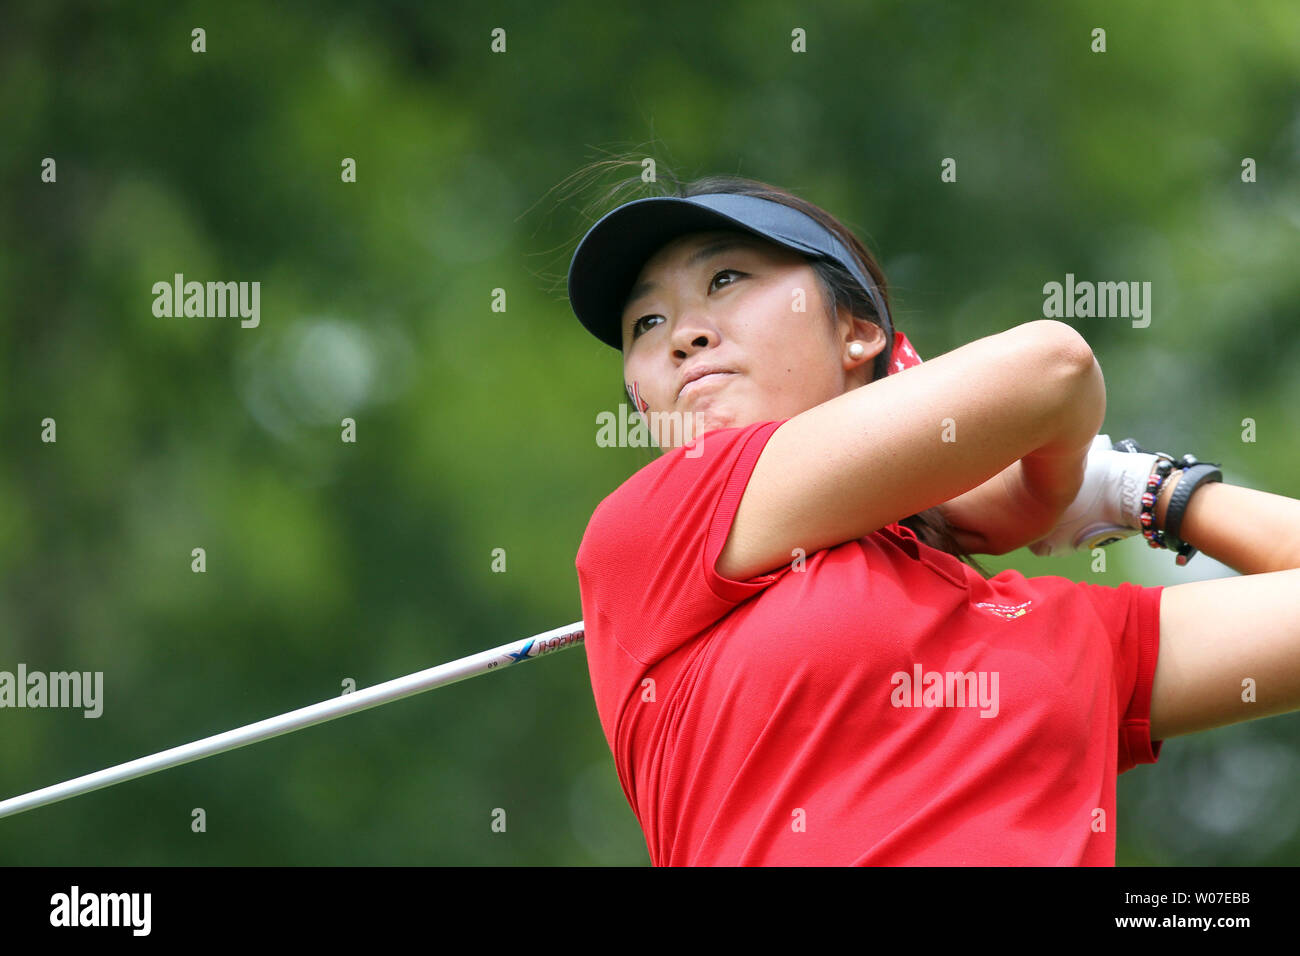 USA team member Erynne Lee of Silverdale, Washington  takes her opening tee shot during the afternoon session of the 38th Curtis Cup match at St. Louis Country Club in Ladue, Missouri on June 6, 2014. The Curtis Cup Match is played by women amateur golfers, one team from the United States of America and one team representing England, Ireland, Northern Ireland,Scotland and Wales. The team consist of eight players and a captain     UPI/Bill Greenblatt Stock Photo